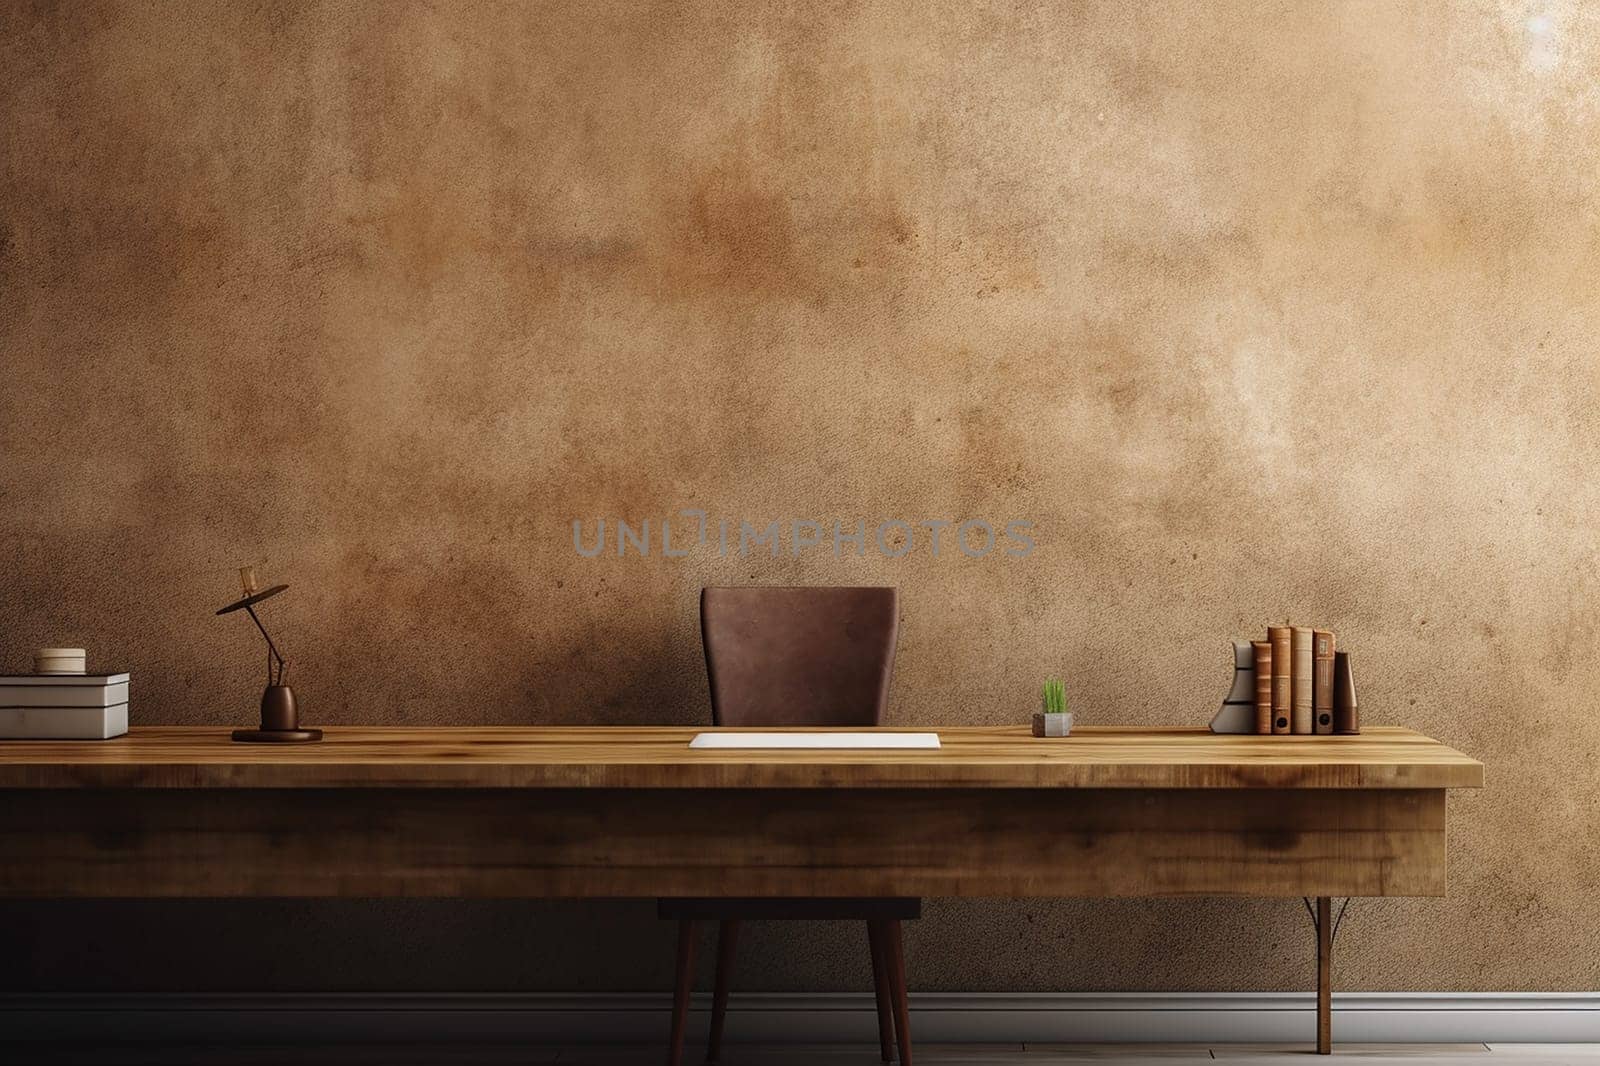 Minimalist workspace with wooden desk, laptop, and decorative items against a textured brown wall.